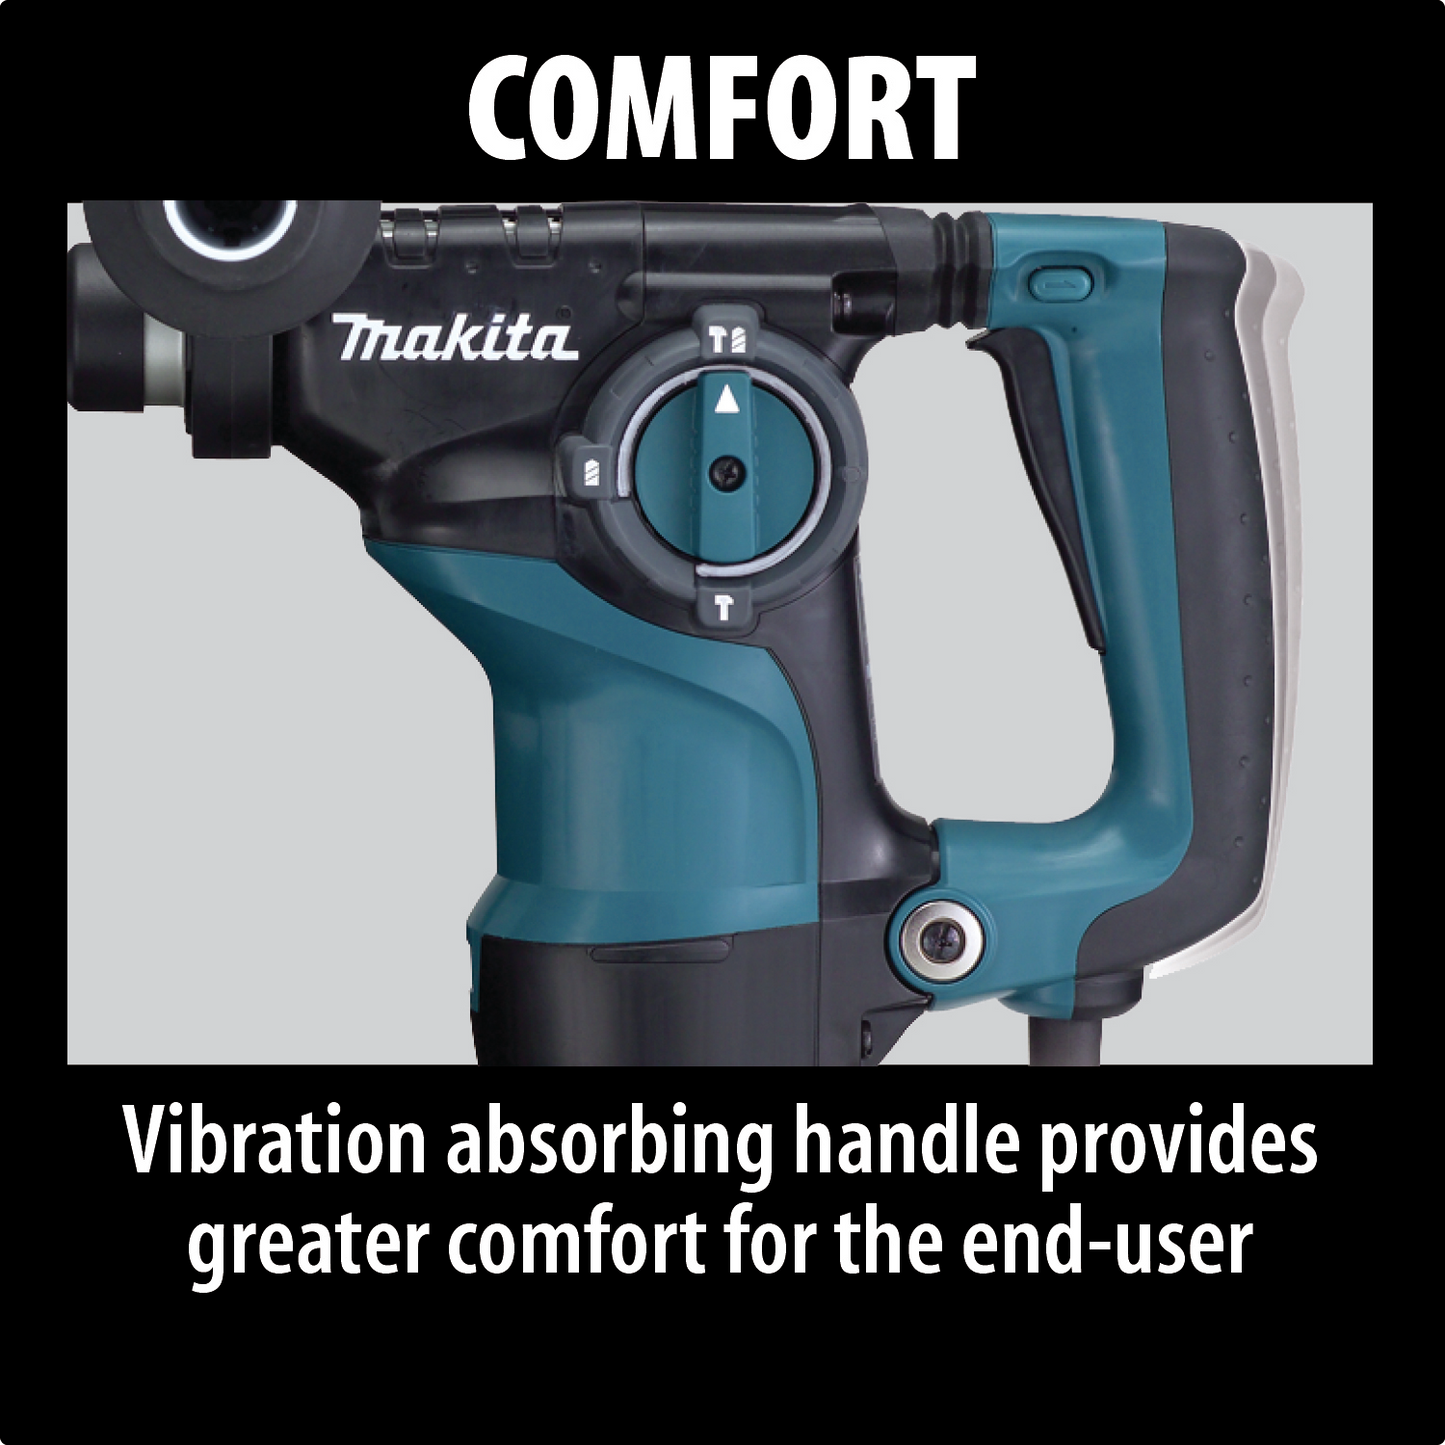 Makita 1 1/8" Rotary Hammer SDS Plus Reconditioned